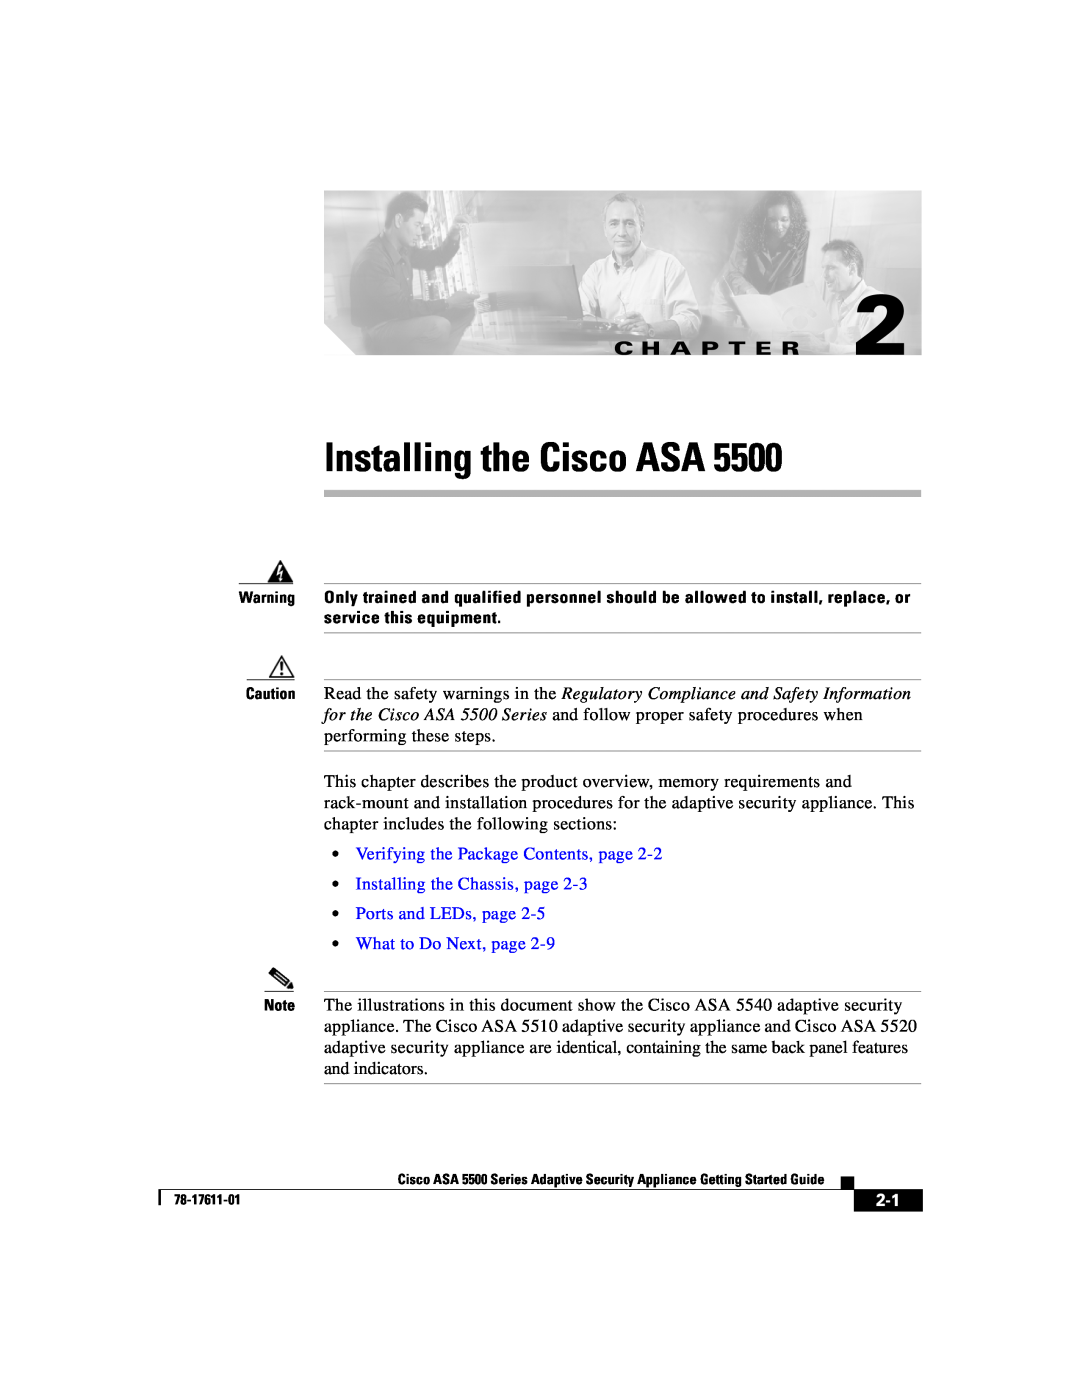 Cisco Systems ASA 5500 manual Installing the Cisco ASA, C H A P T E R, •Verifying the Package Contents, page 